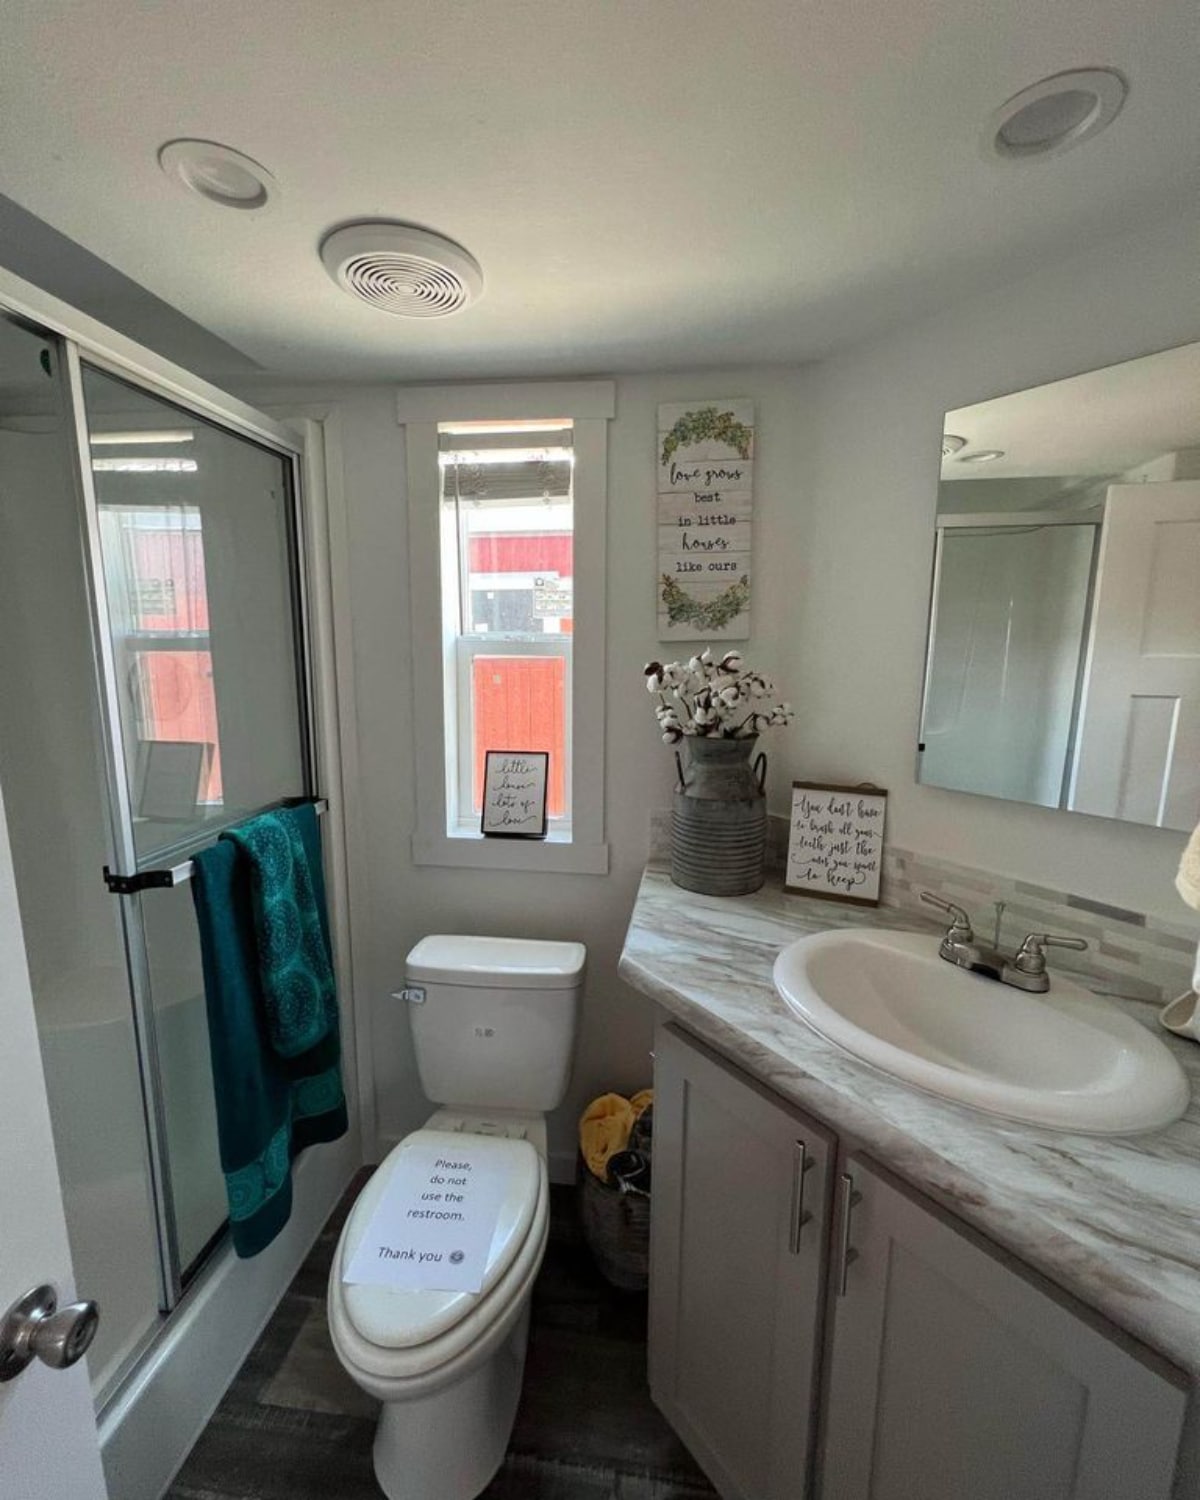 Beautifully organised bathroom of 399 sf Tiny House has a compact toilet, sink with vanity and mirror and separate shower area